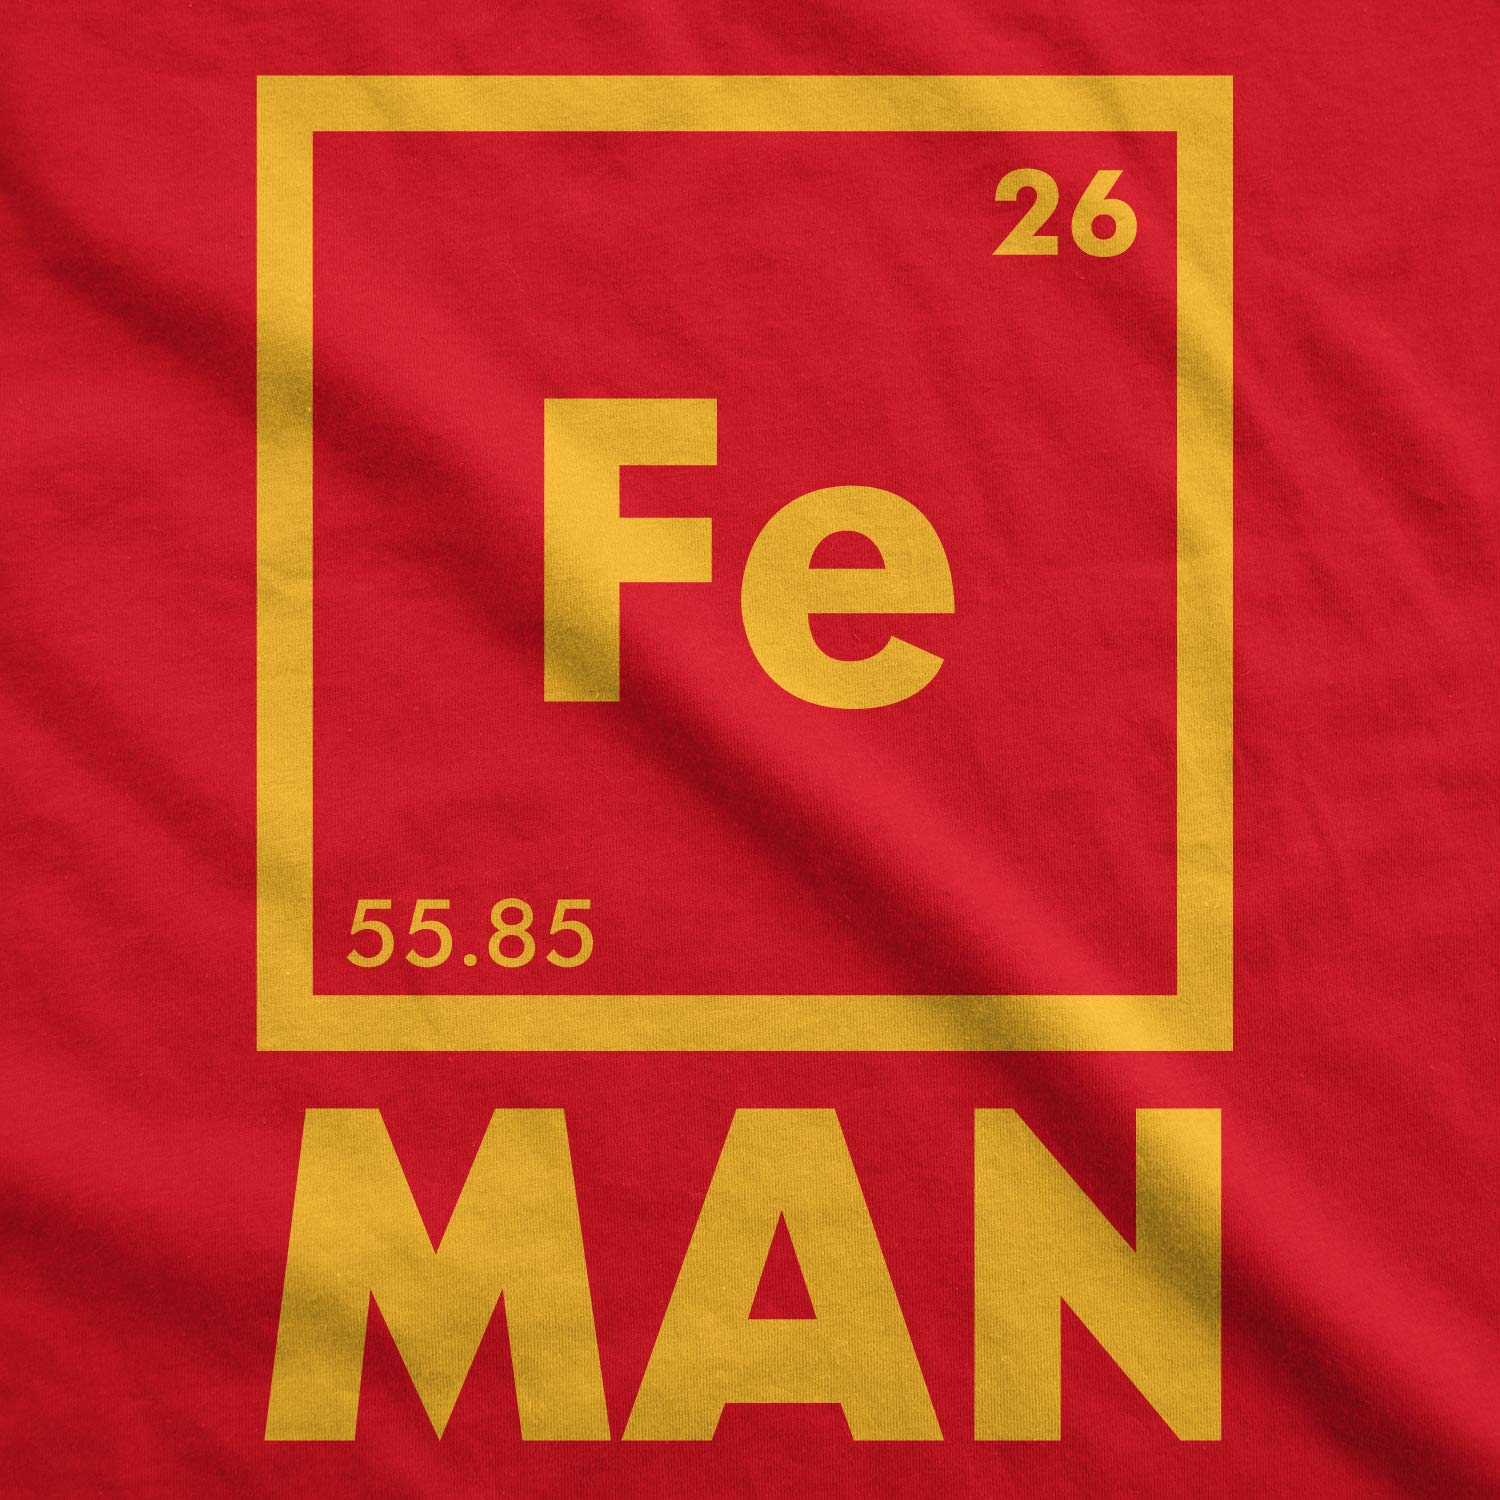 Mens Iron Man Science T Shirt Cool Novelty Funny Nerdy Graphic Print Tee Guys